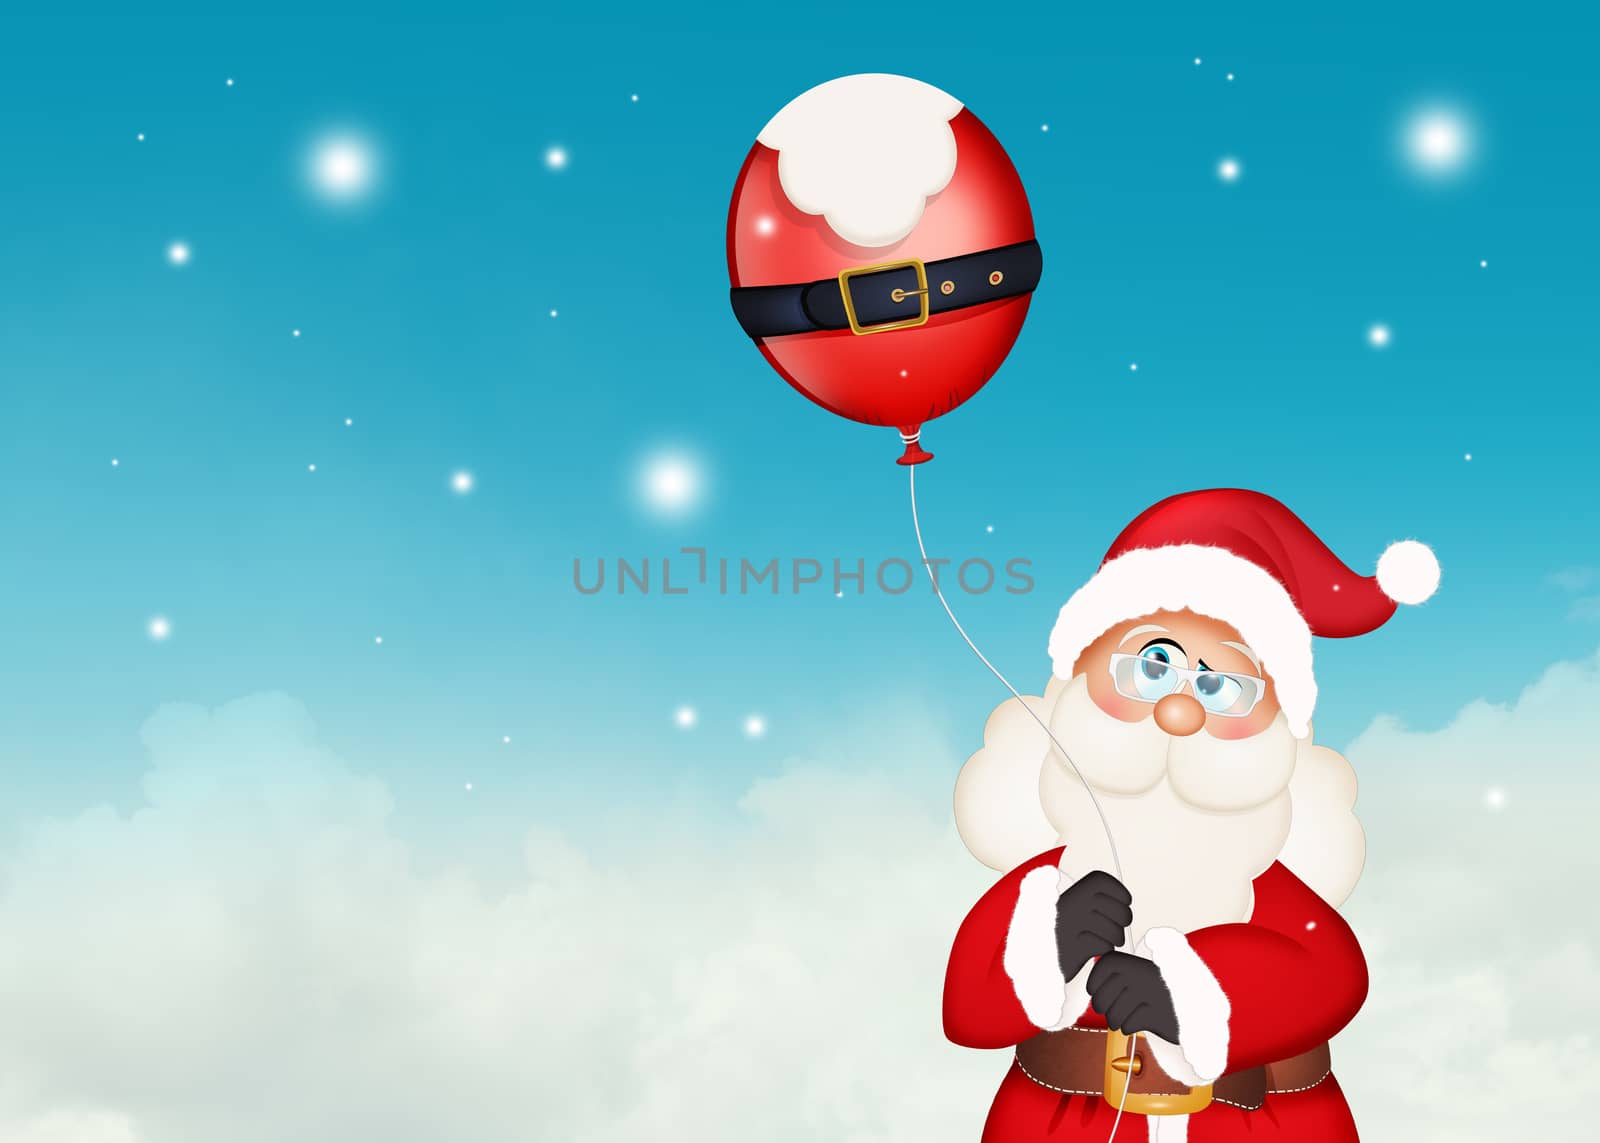 illustration of Santa Claus with balloons